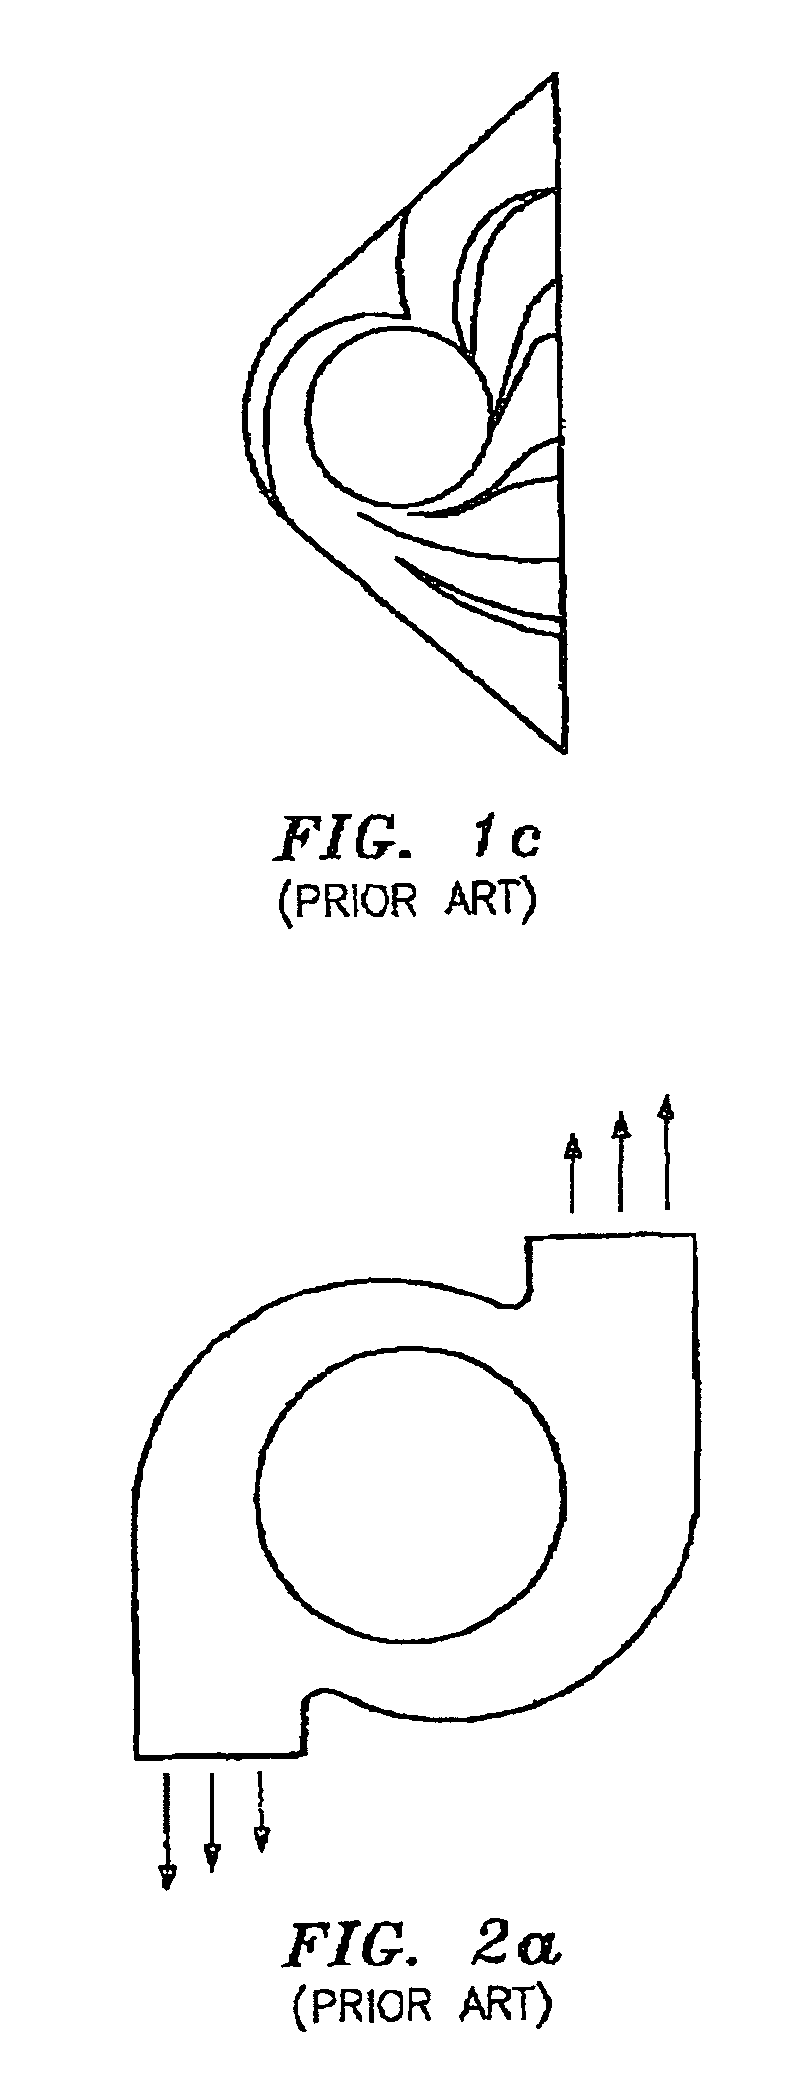 Centrifugal blower with partitioned scroll diffuser